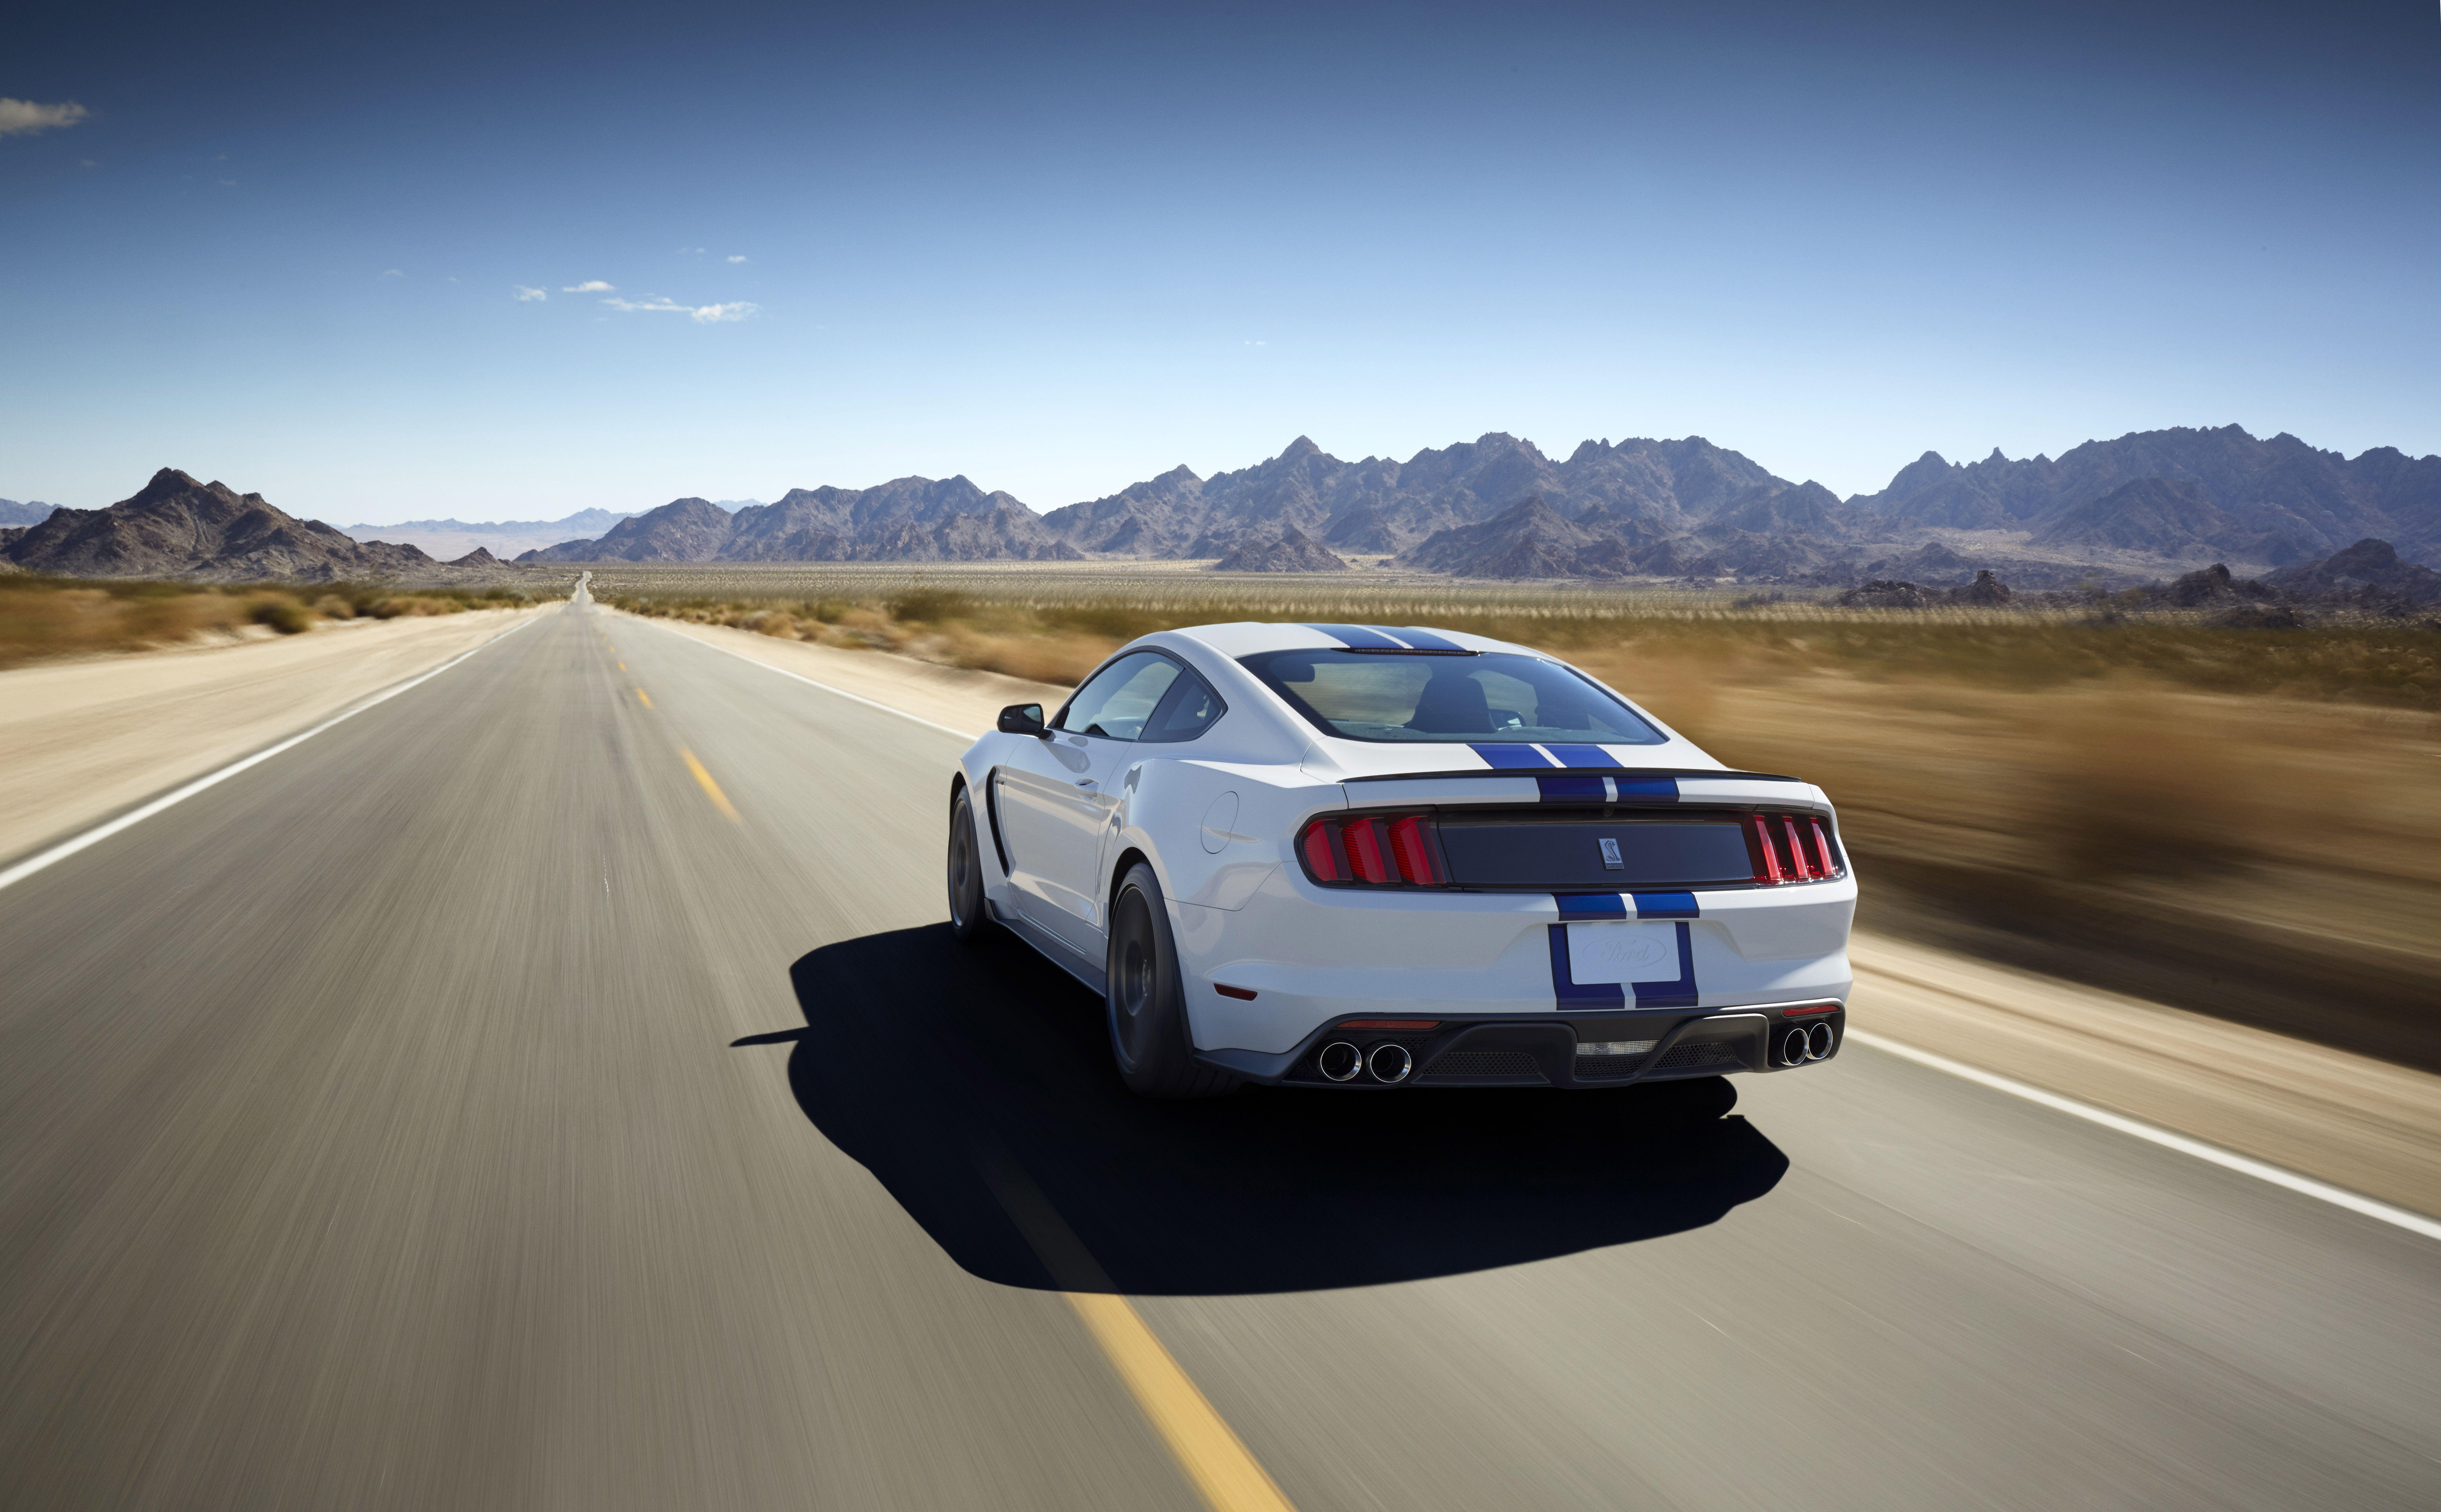 Ford Mustang Shelby GT350 Wallpaper Image Photo Picture